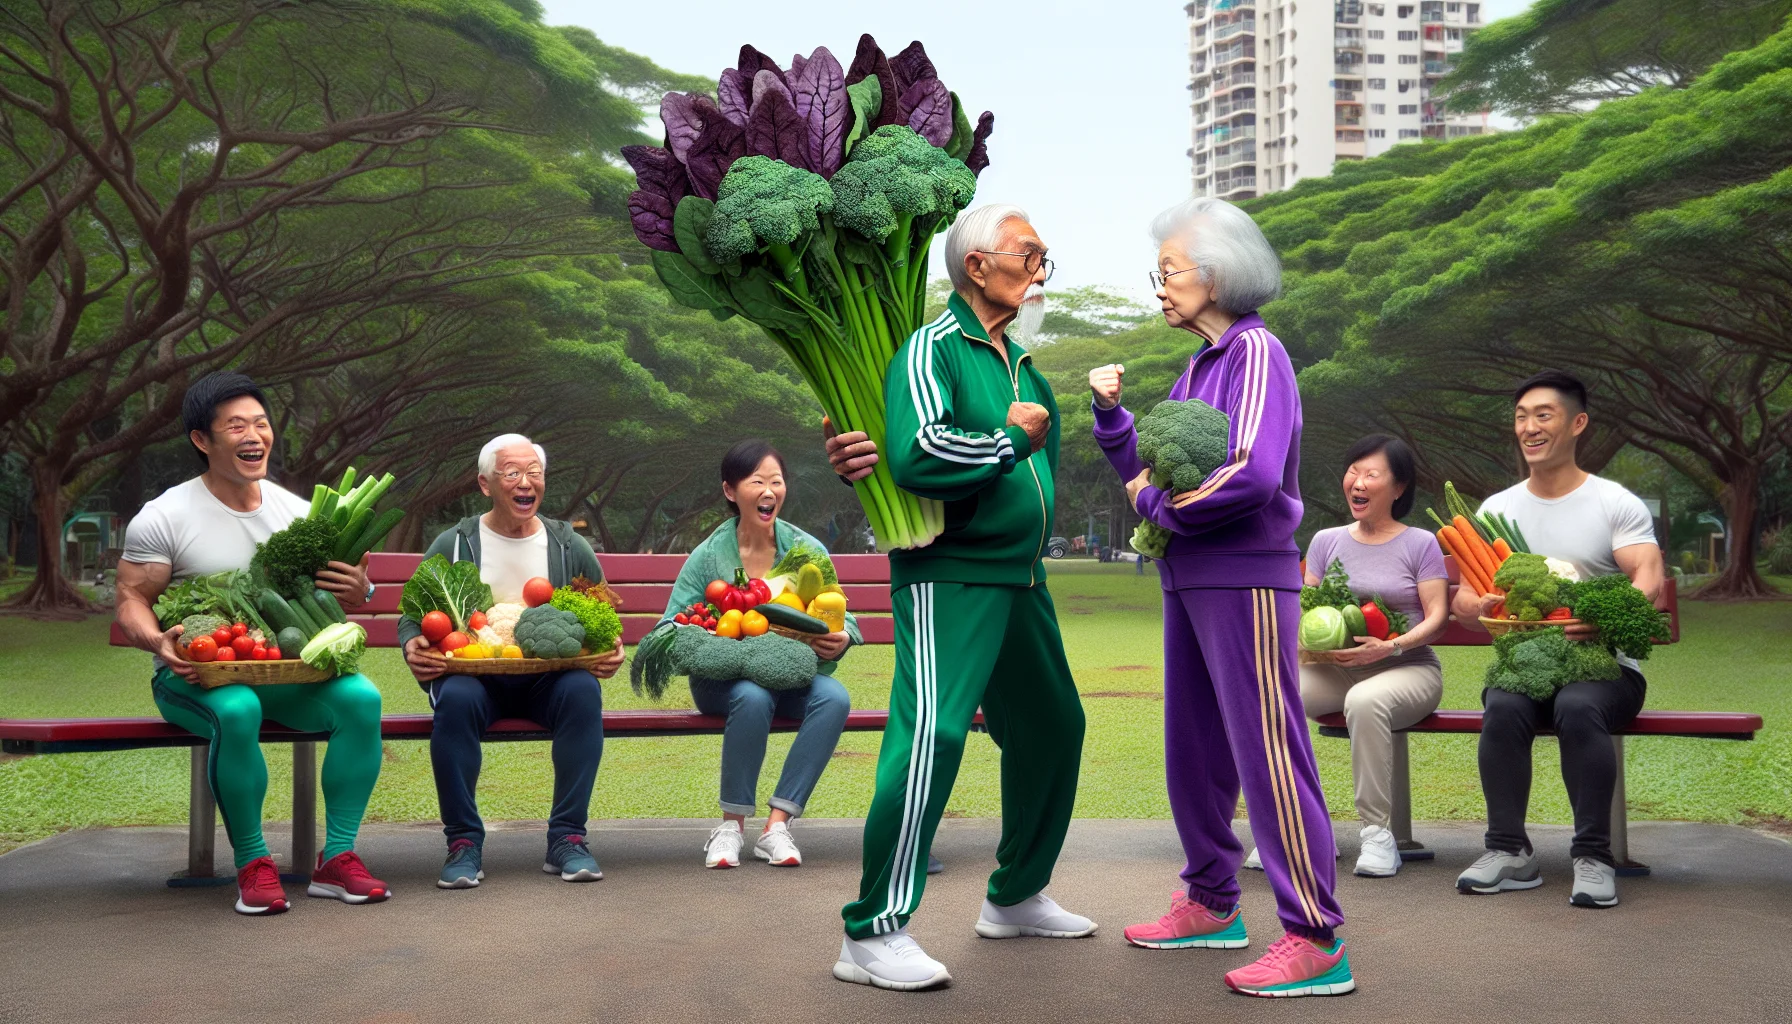 Let's imagine a humorous scene in a friendly neighbourhood park. An Asian elderly woman and a Caucasian elderly man, who are known to be health enthusiasts, have a standoff - but this is no ordinary standoff. It's a 'high fiber, low carb food' standoff. The elderly man, wearing a classic green tracksuit, presents a towering stack of spinach leaves like a prized trophy. The elderly woman, in her vibrant purple sweat suit, retaliates by flaunting a huge stalk of broccoli like a scepter. Their amused friends, carrying a variety of vegetables, fruits and whole grains, watch from park benches, laughing and cheering on this peculiar dietary duel.